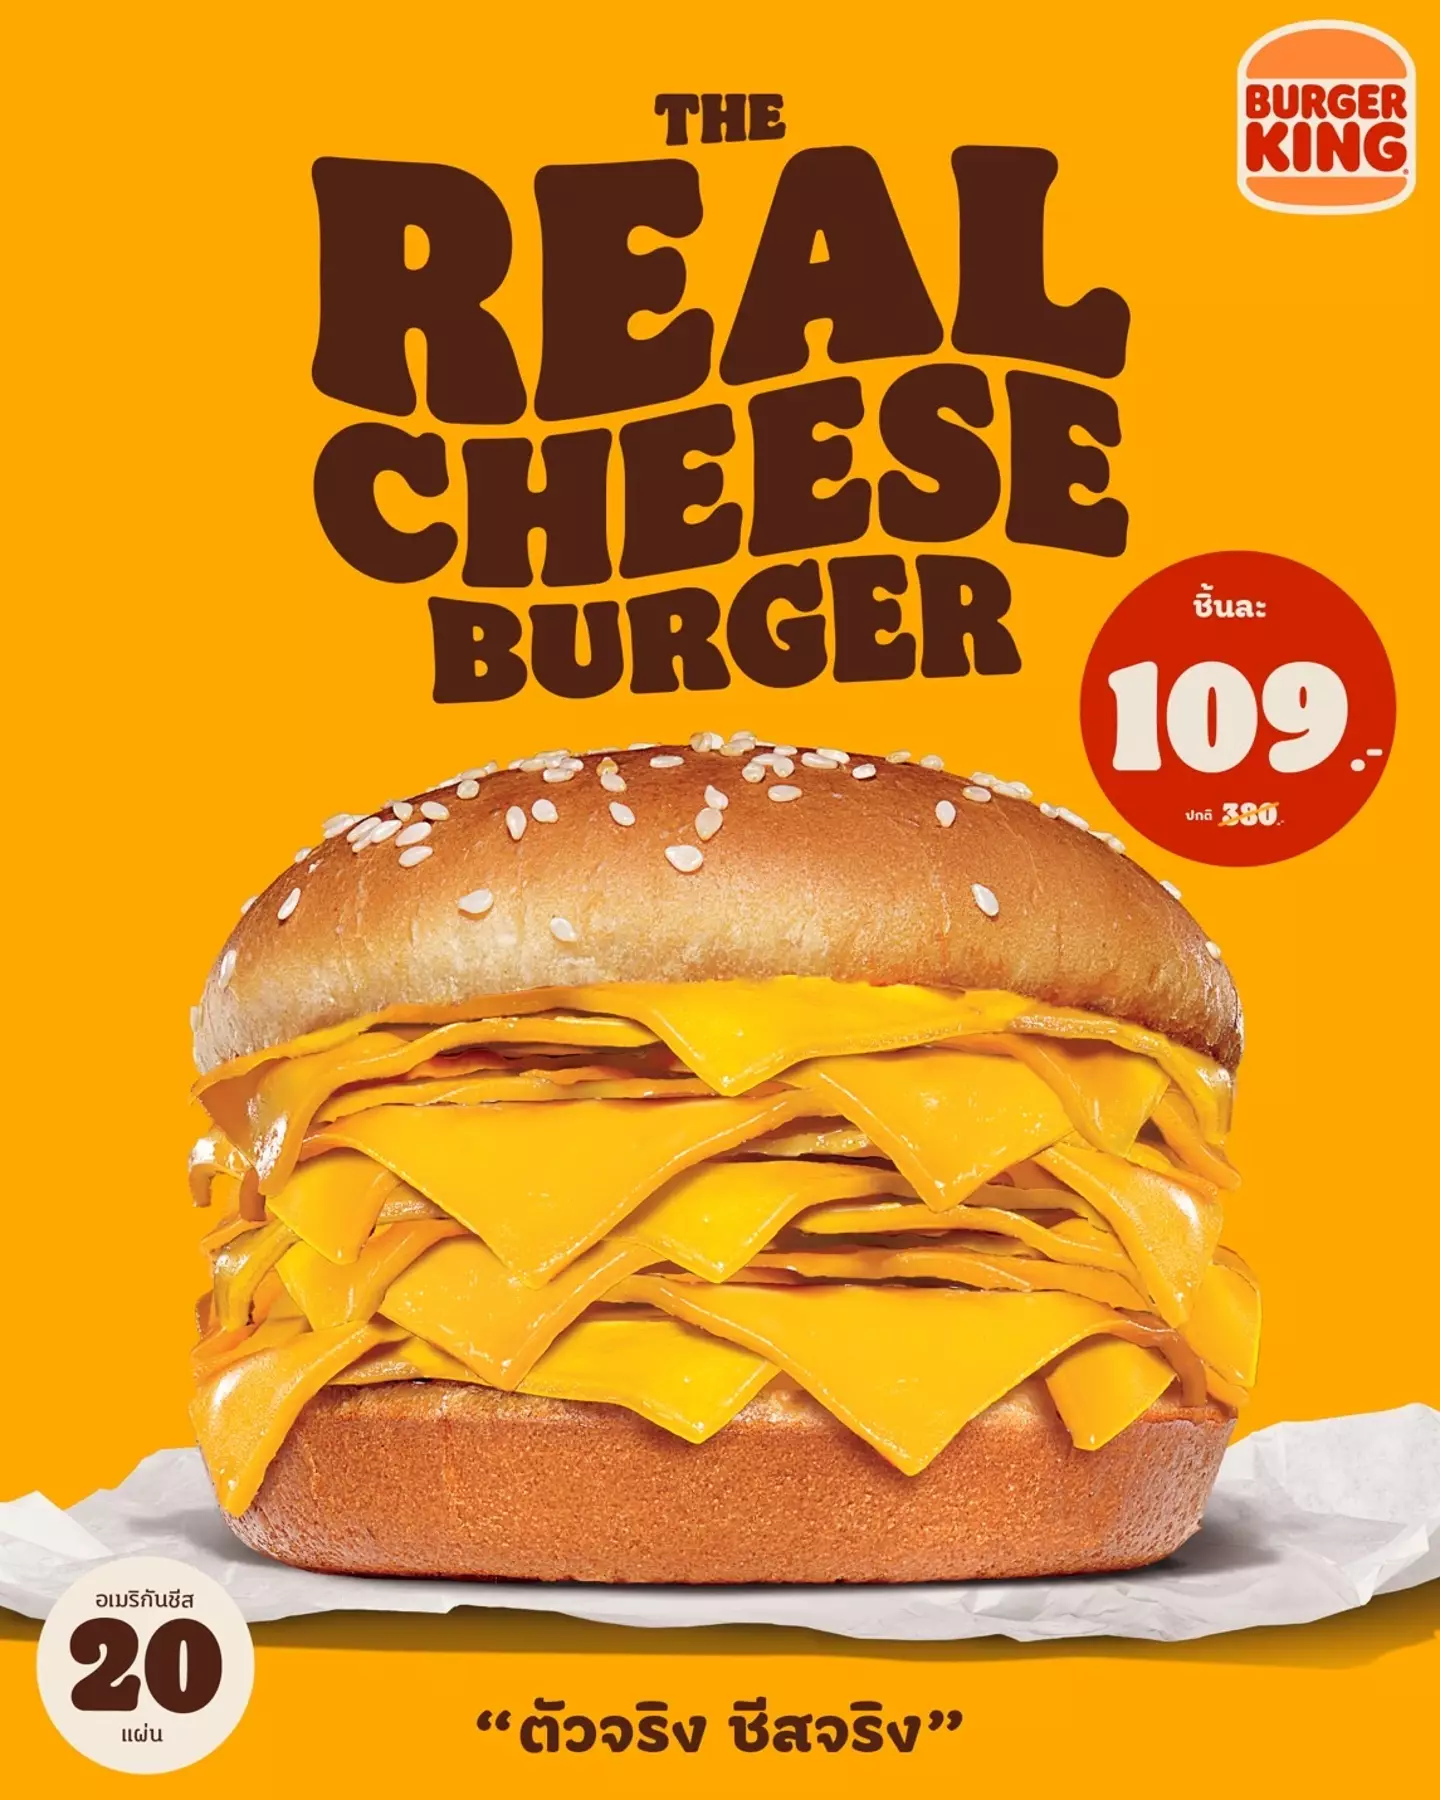 The burger is exclusive to Thailand.